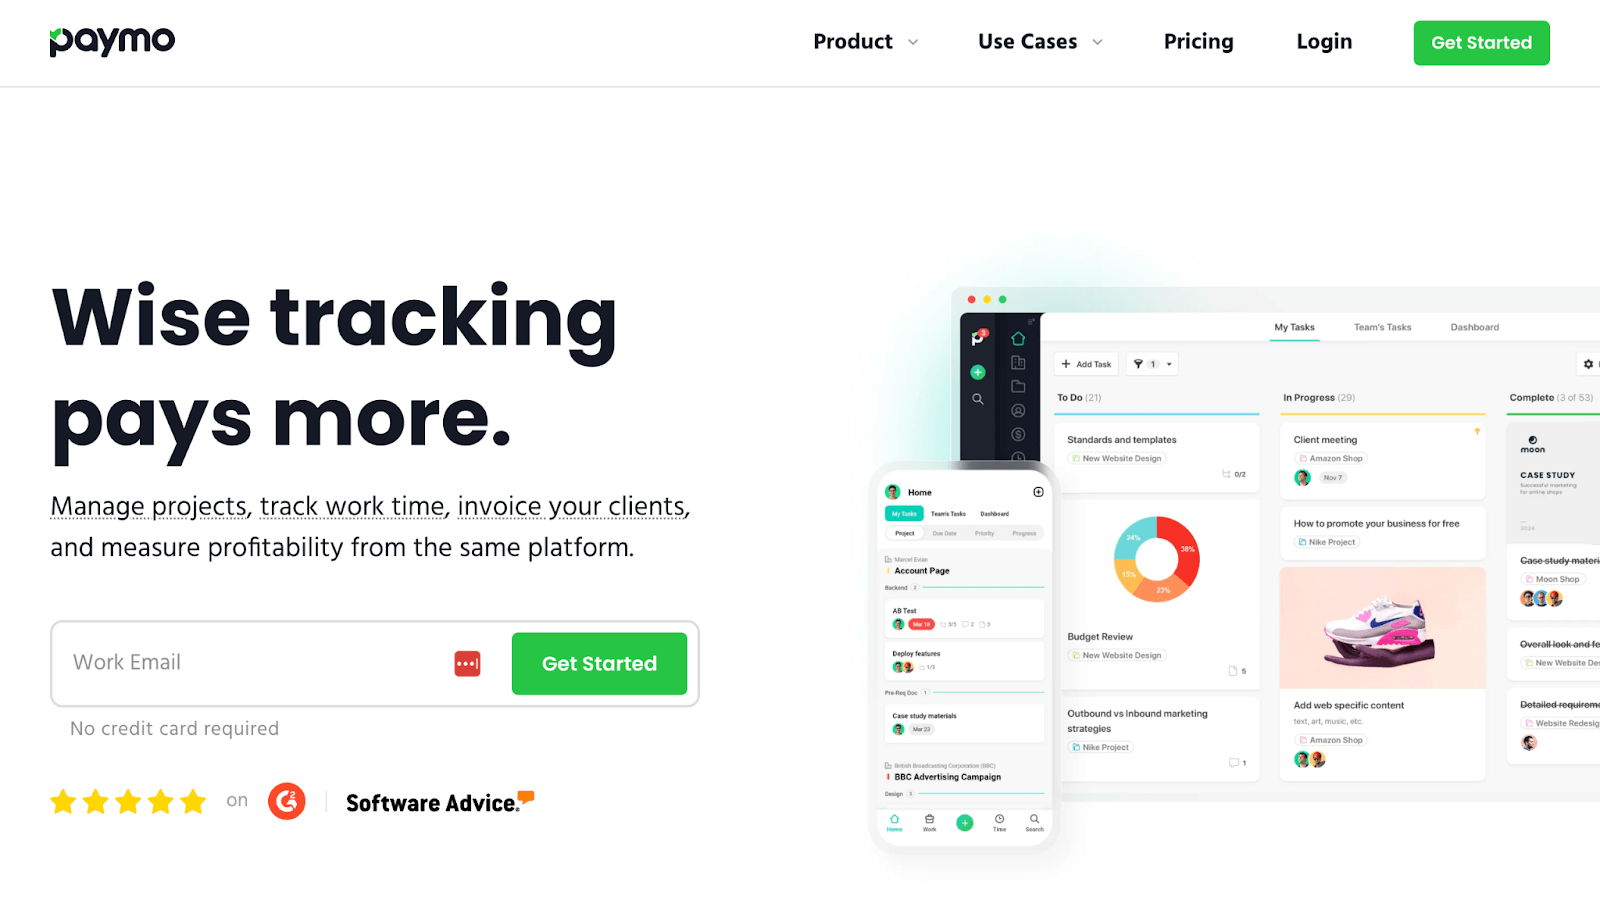 Paymo homepage: Wise tracking pays more.